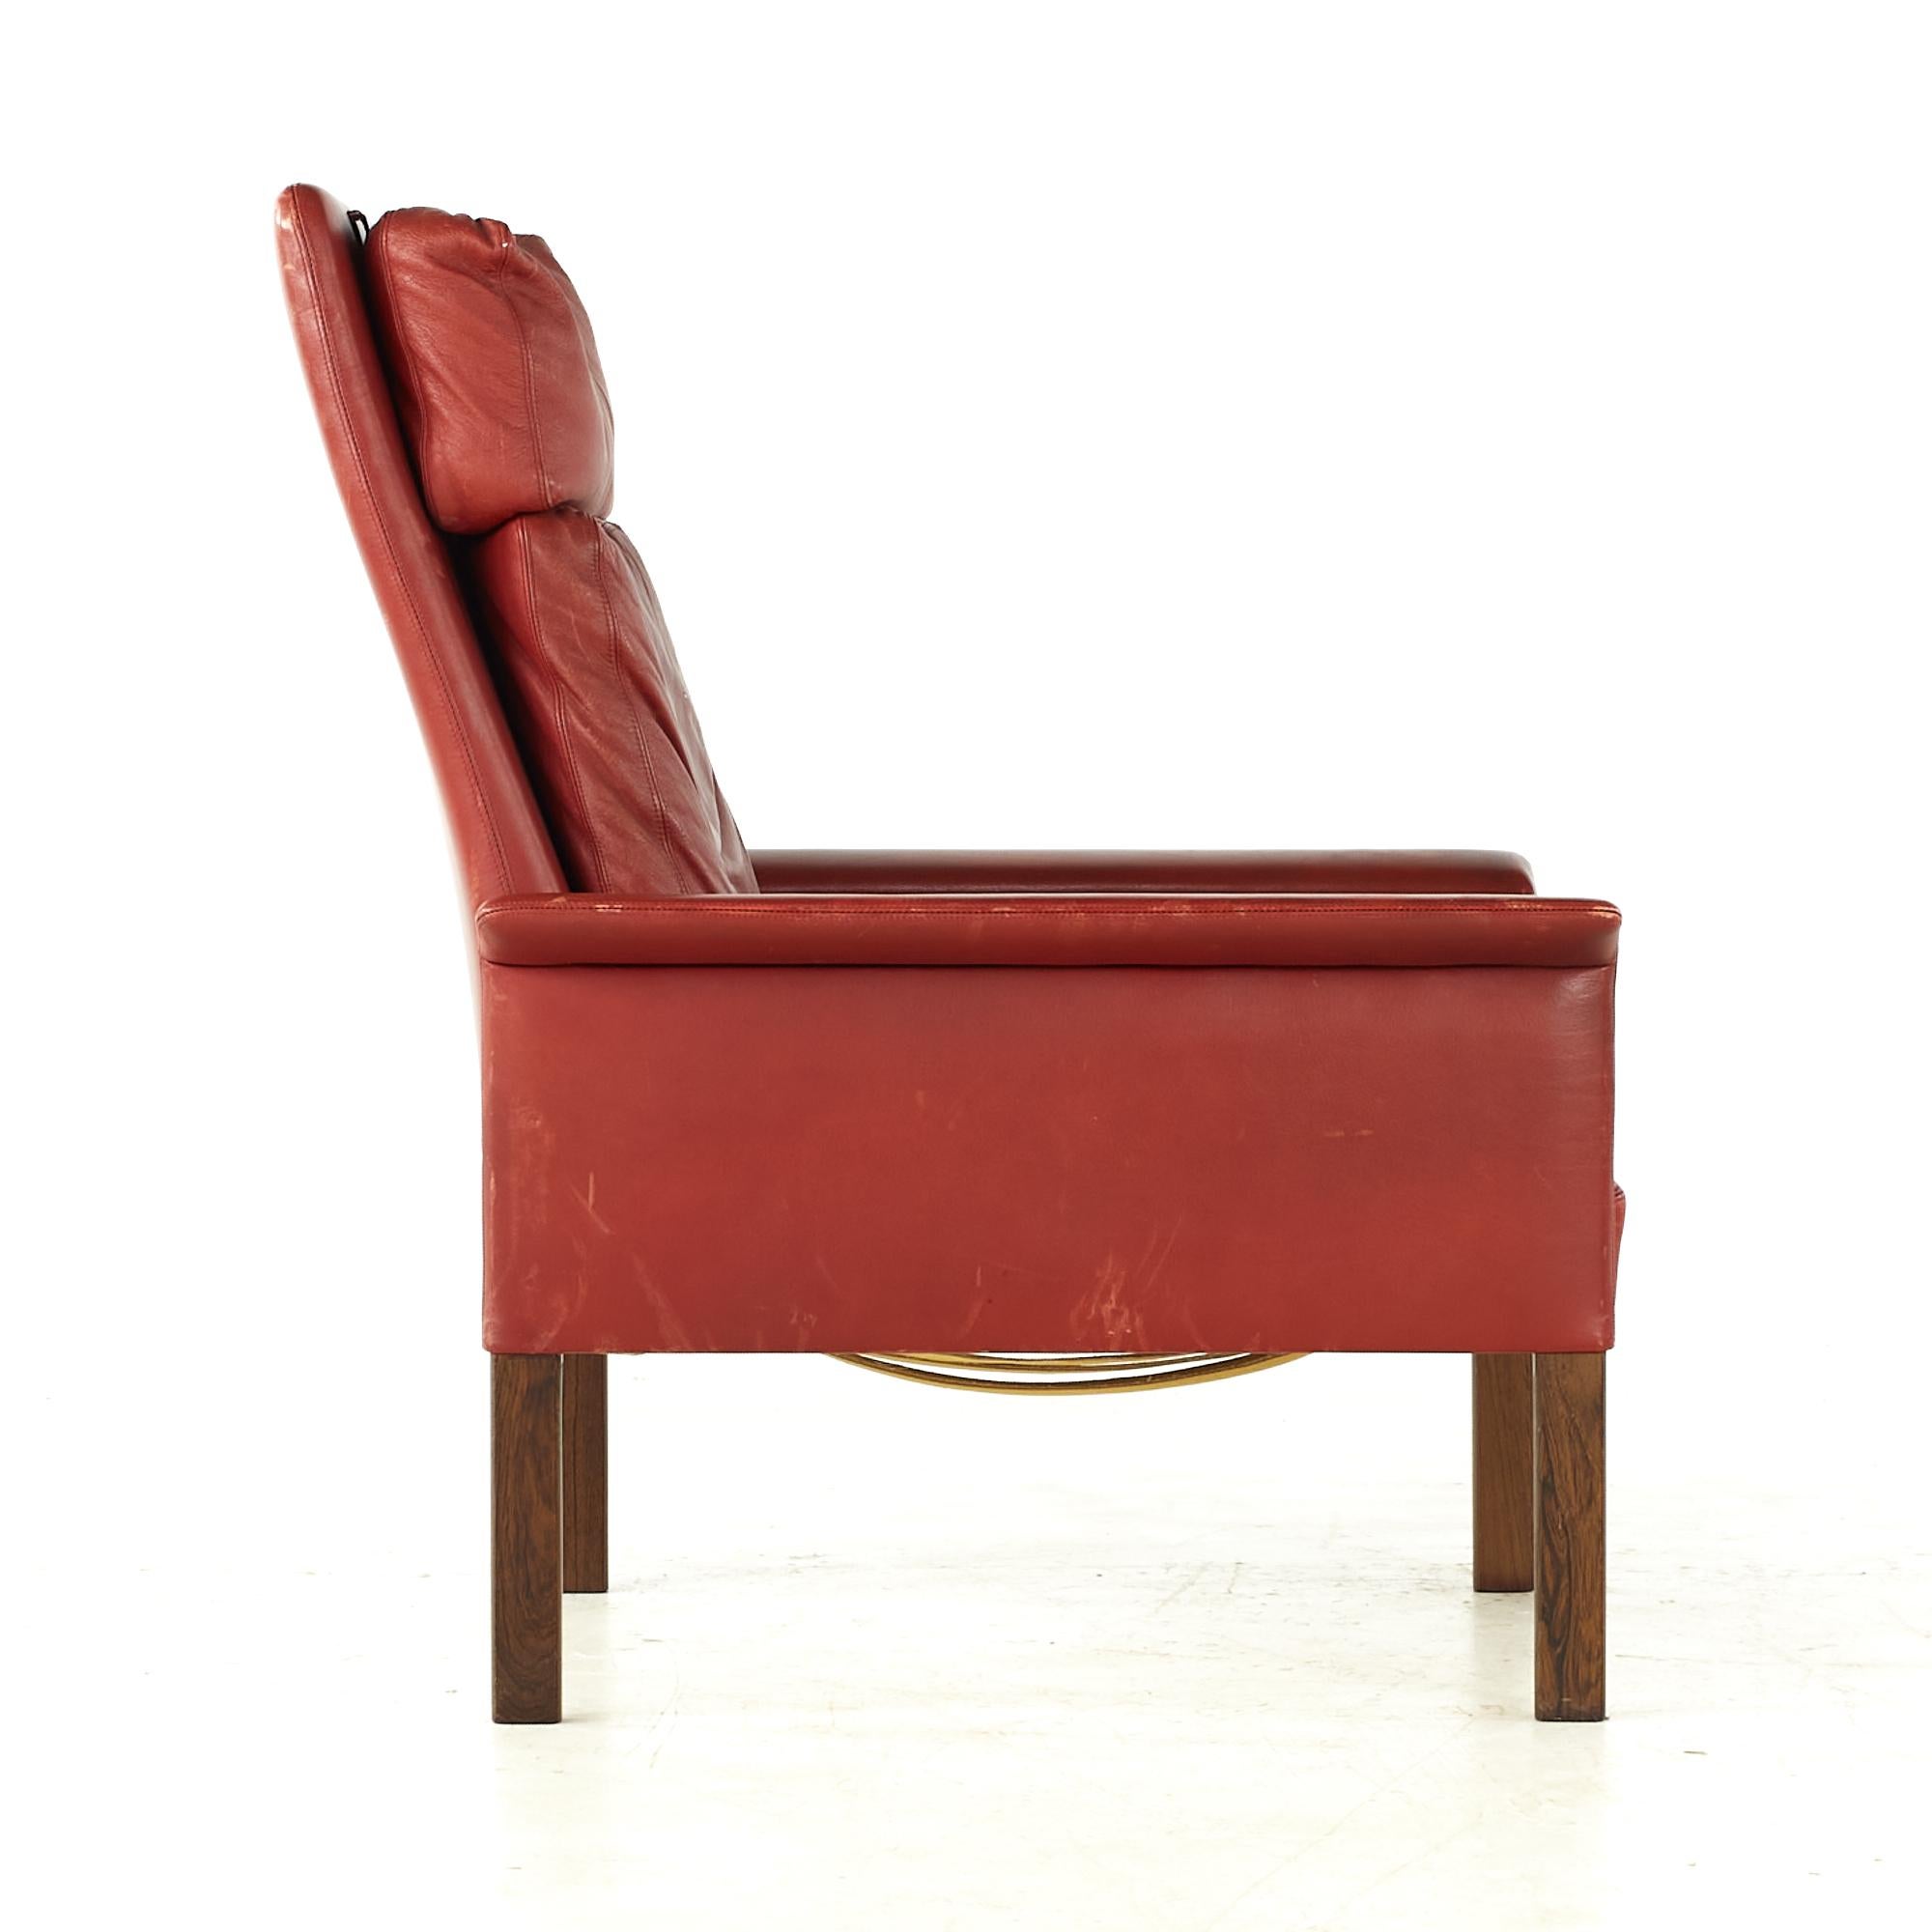 Hans Olsen Midcentury Danish Rosewood and Red Leather Chairs, Pair For Sale 2